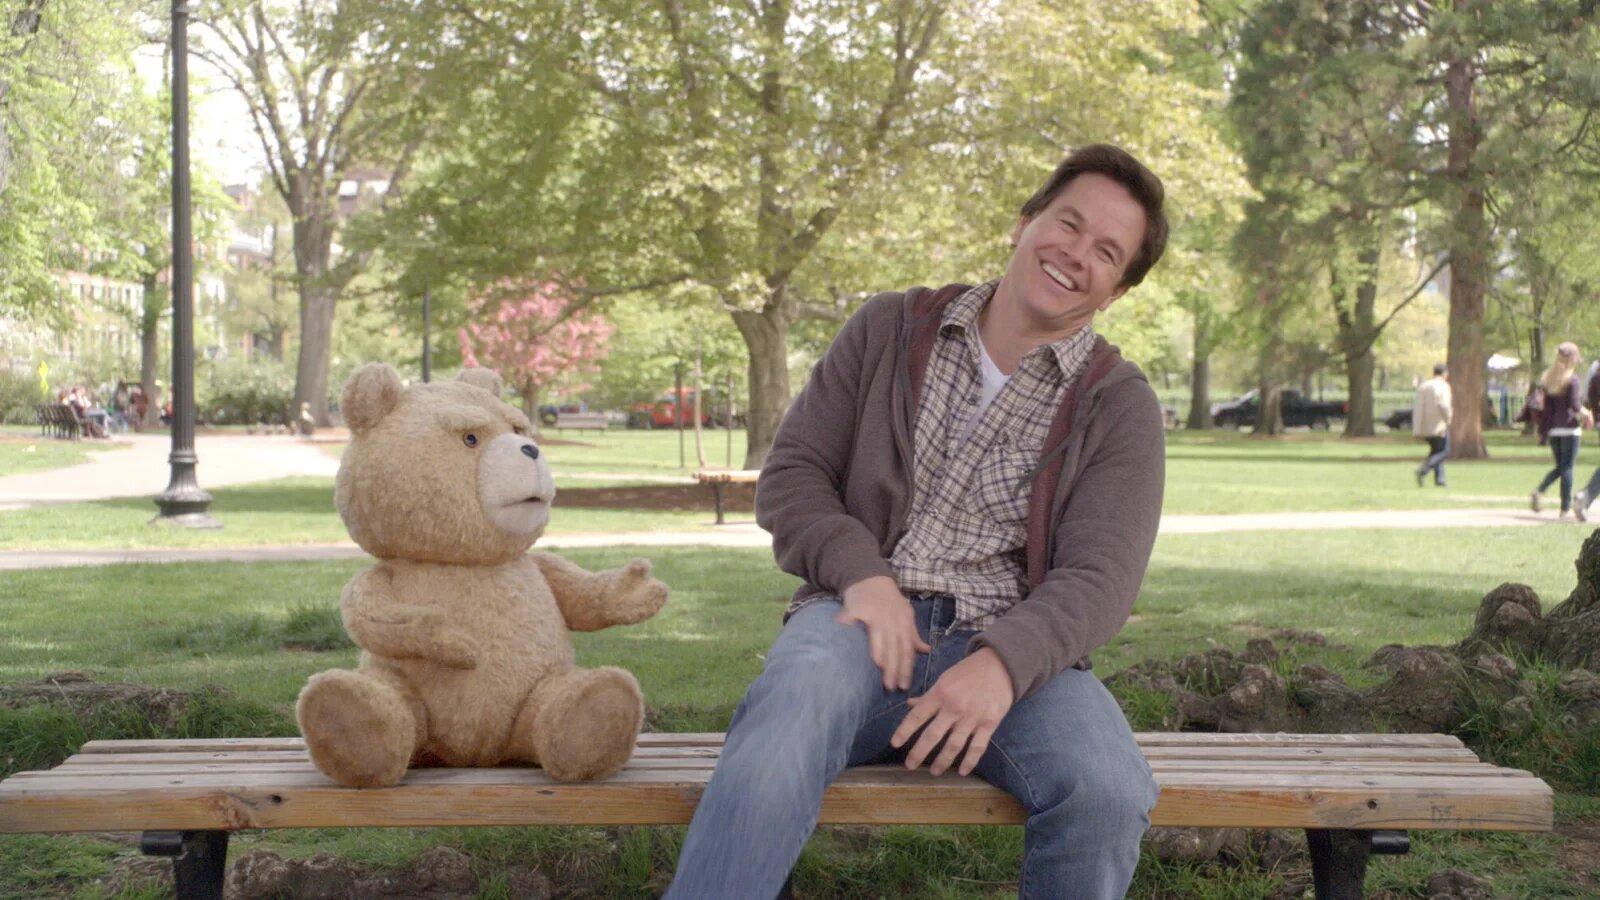 John and Ted in Ted